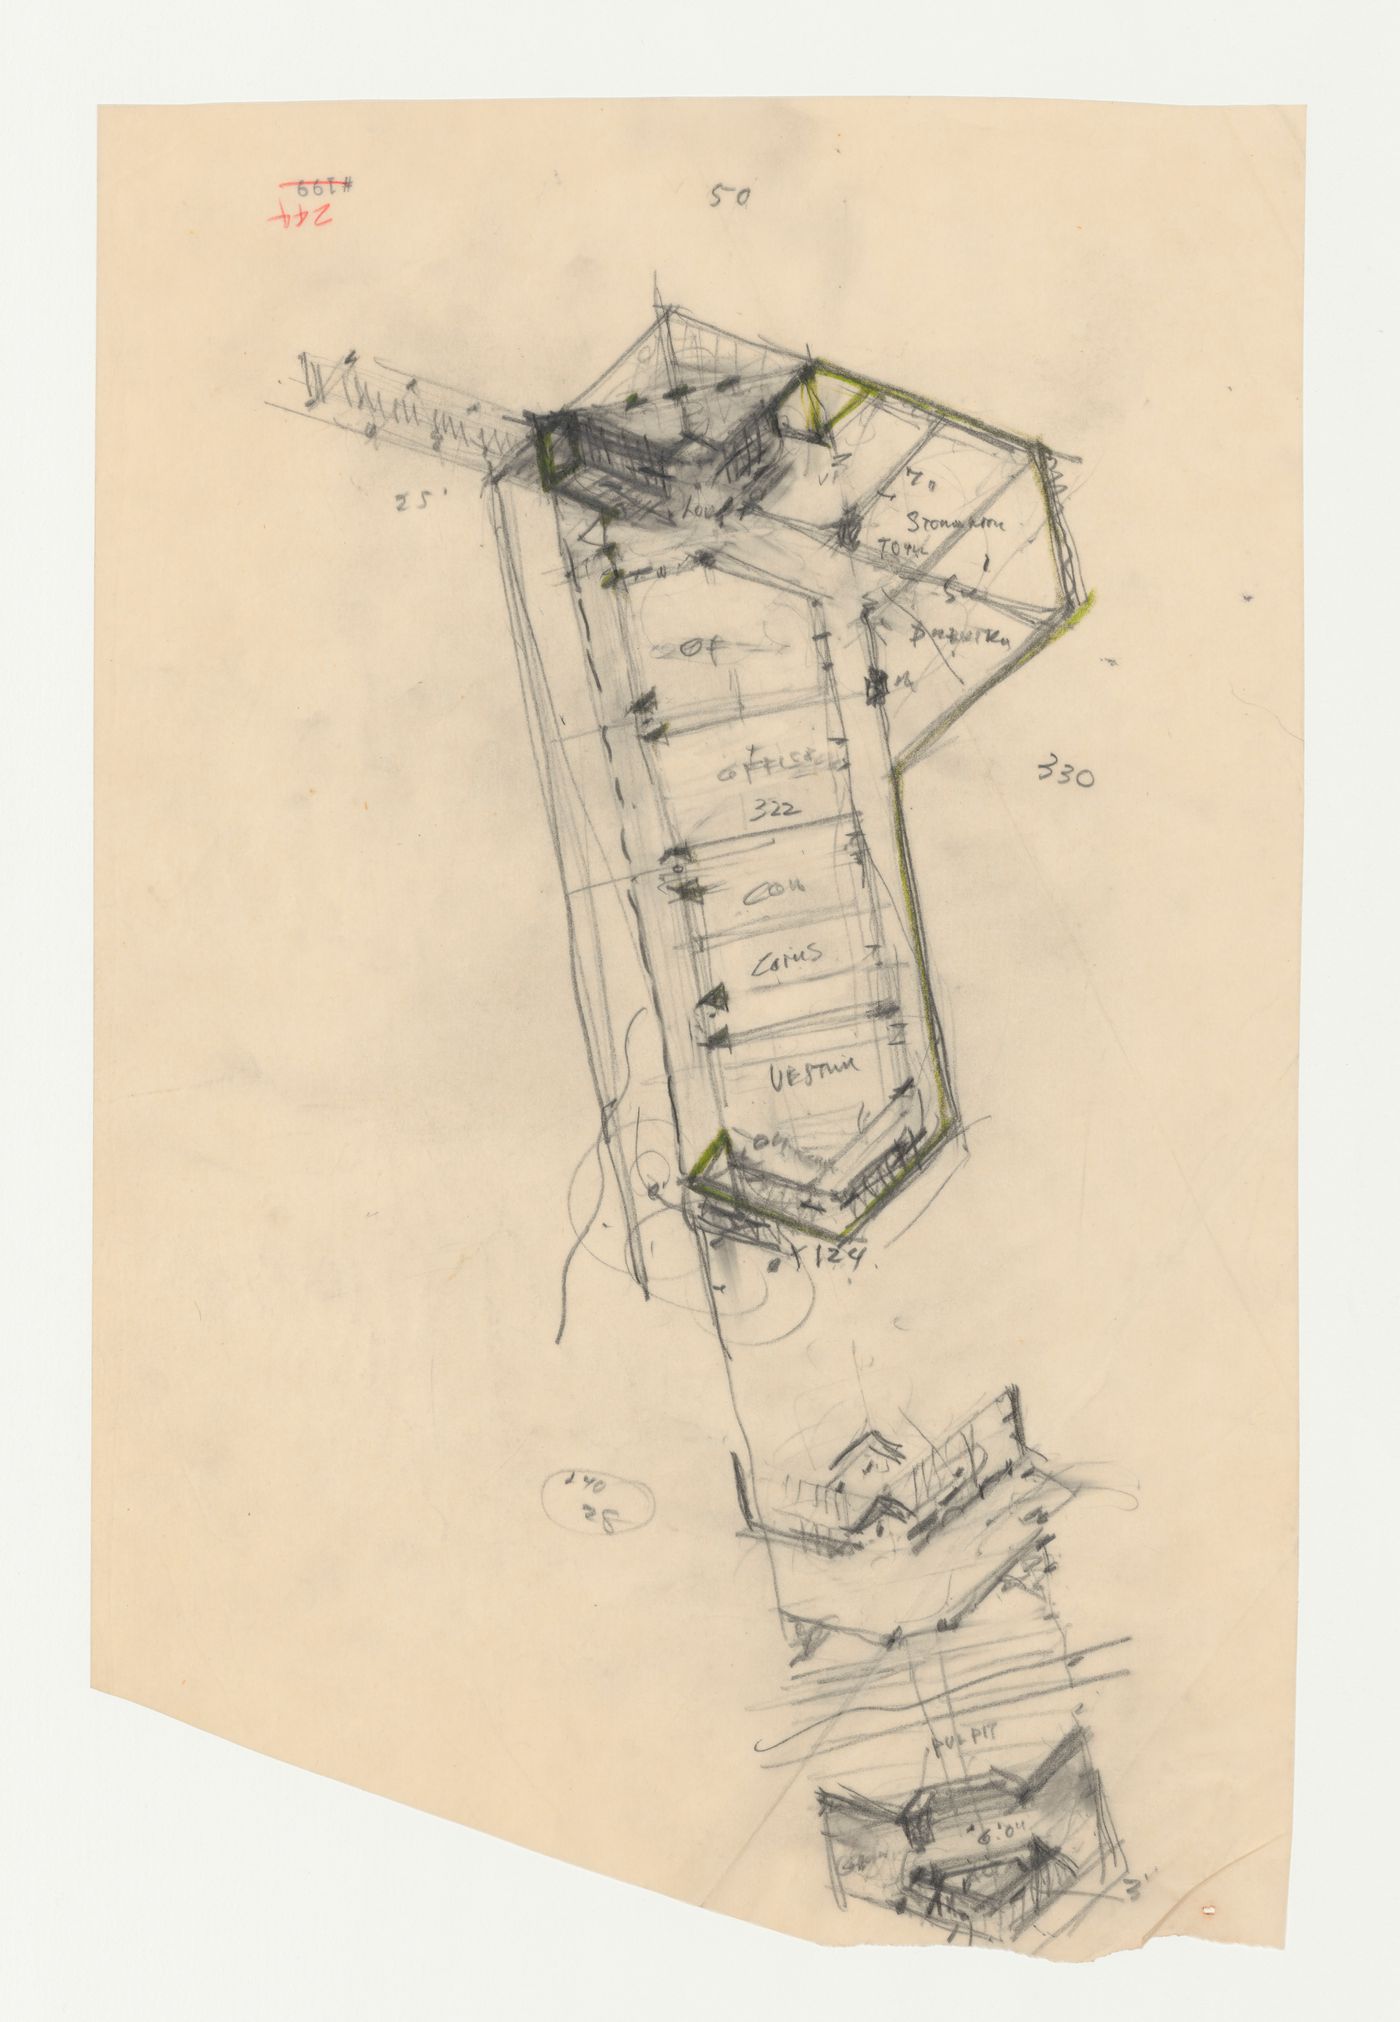 Swedenborg Memorial Chapel, El Cerrito, California: Plan for the lower building with details for the chapel level